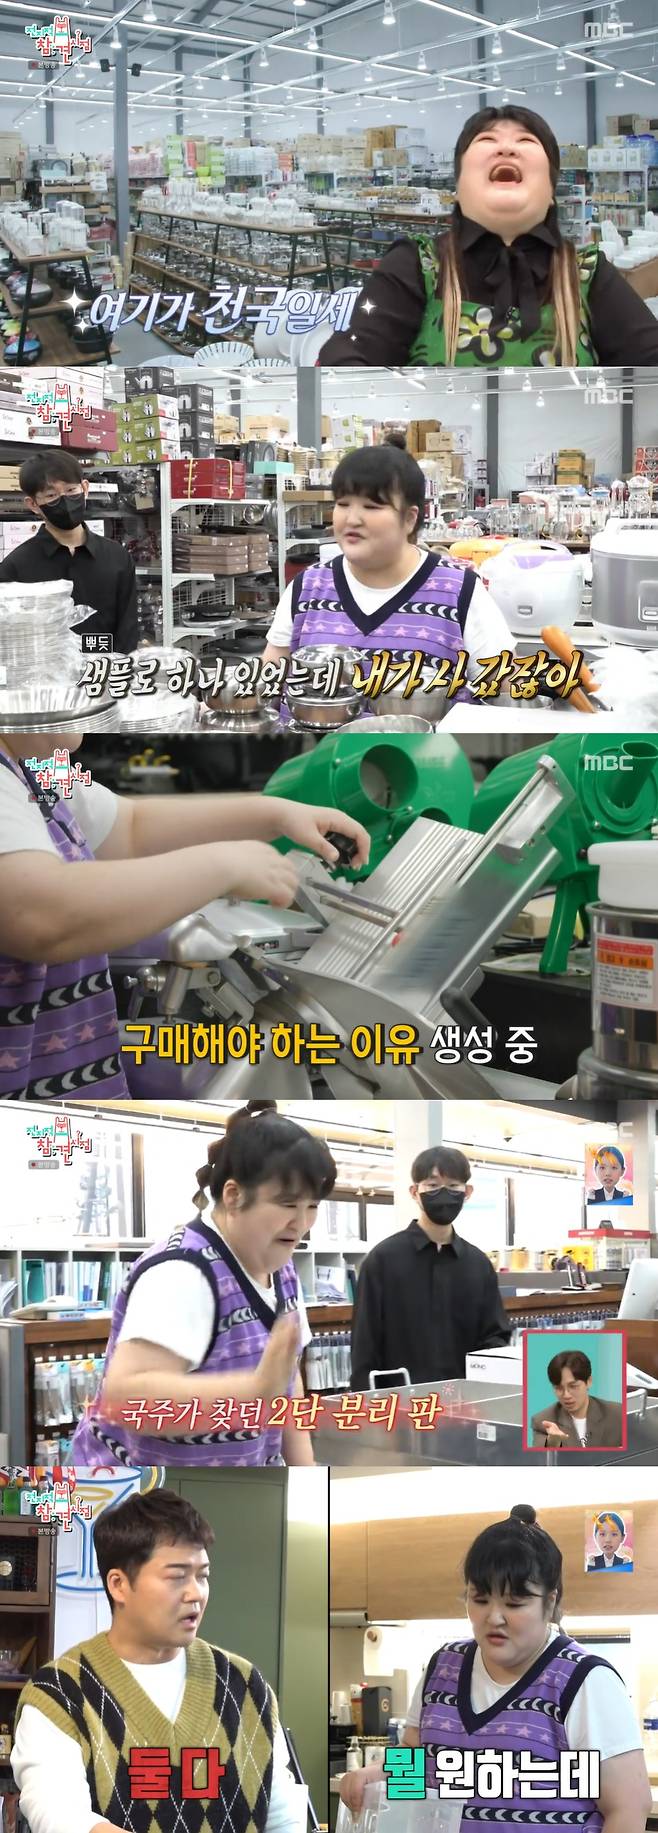 Seoul =) = Lee Guk-joo showed the scale of The Kitchen goods shopping.At MBCs Point of Omniscient Interfere, which aired on the 22nd, comedian Lee Guk-joo and manager Lee Sang-sus interfering video was released.I started shopping in earnest. I was excited and watched while singing. I saw my eyes when I saw the bowl that was already there. I got the pattern and the color but it was different.Lee Guk-joos eye-catching products, such as sauce bottles with three lines of sauce from bowls, hospital food plates, and oversized chopping boards, were endless.The Manager also caught wind of Lee Guk-joo, saying that there was a more novelty item, and Lee Guk-joo eventually bought a commercial electric boiling machine despite the managers discouragement.